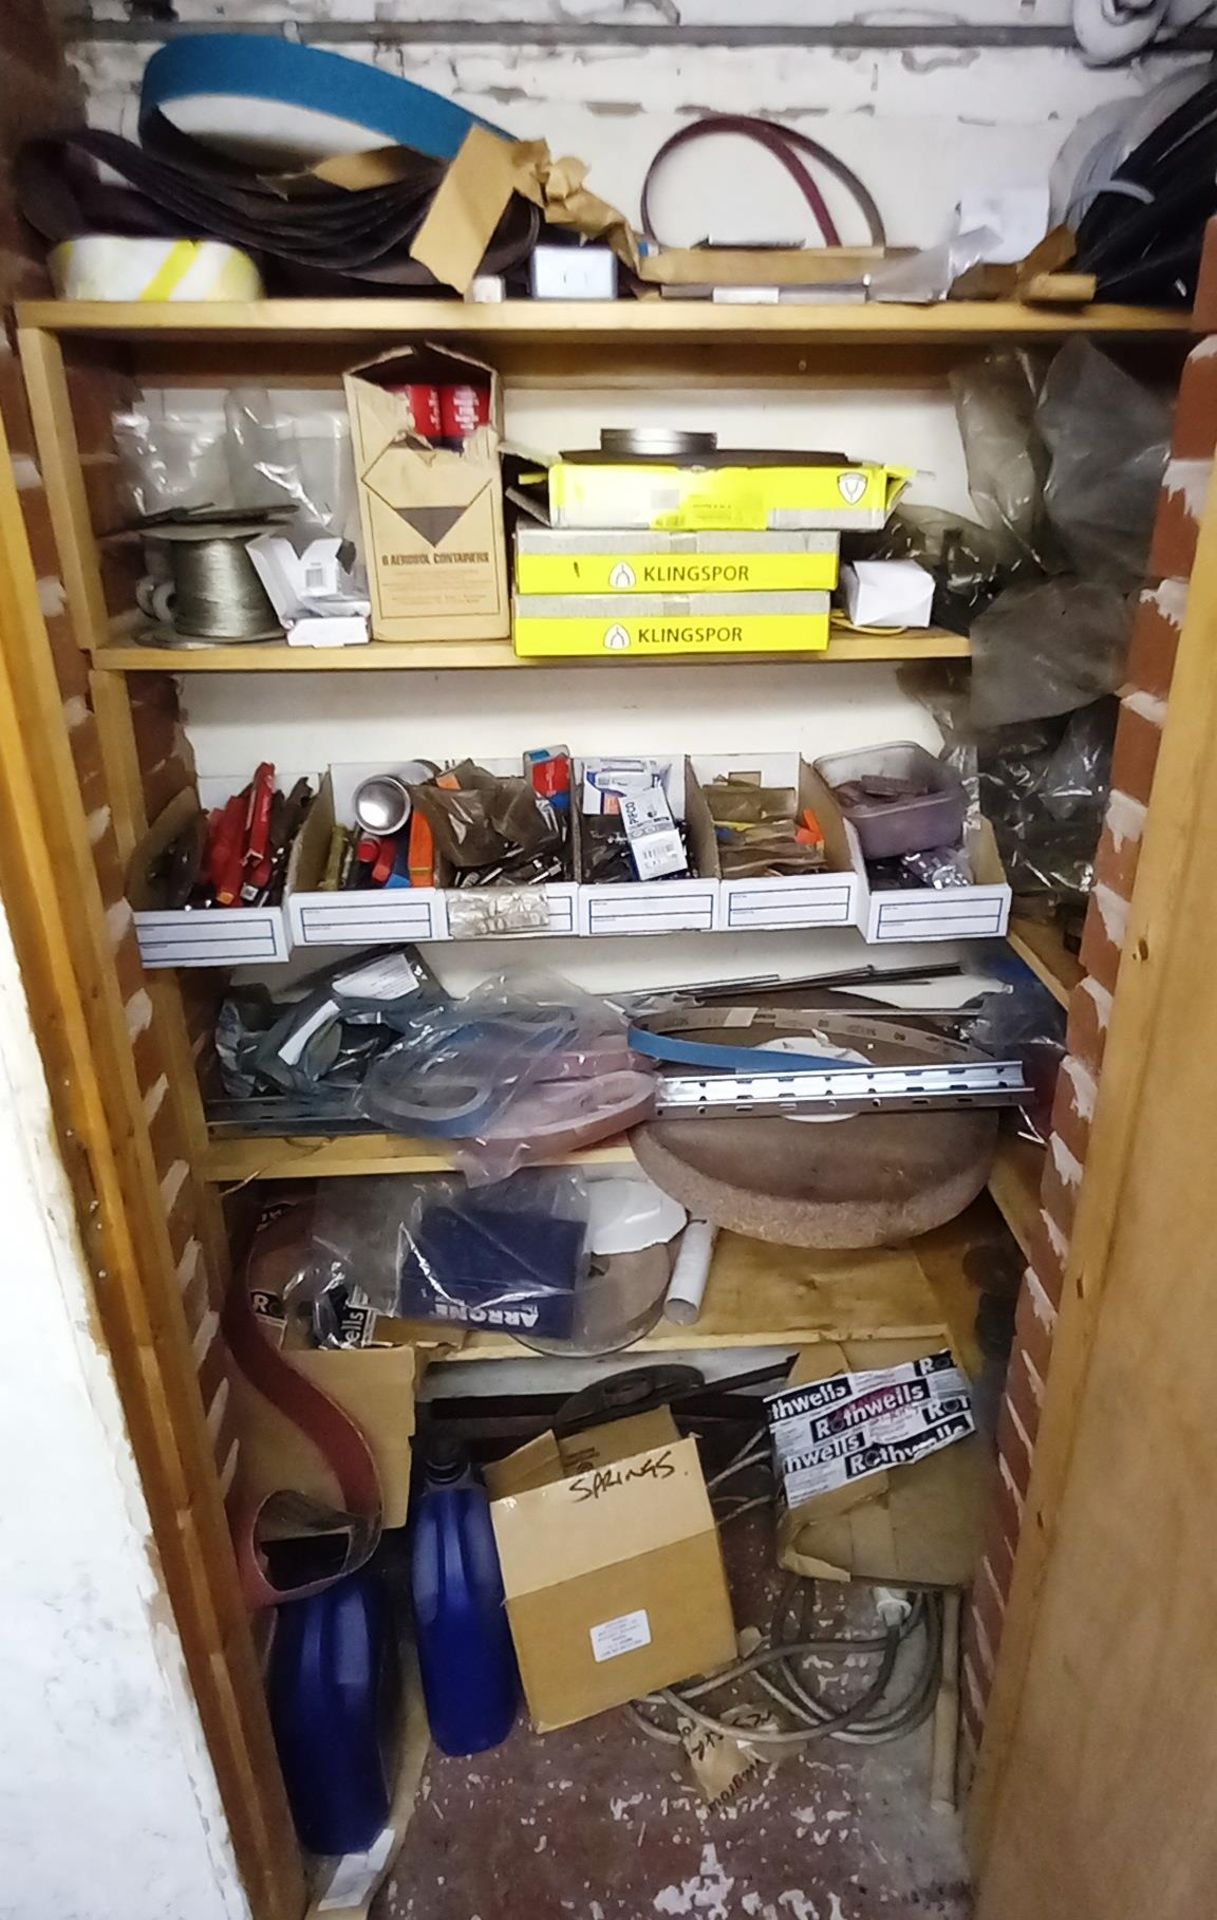 Contents to Storage Cupboard to Include Taps, Dye's, Reemers, Cutting Disks, Cutting Oils etc - Image 2 of 3